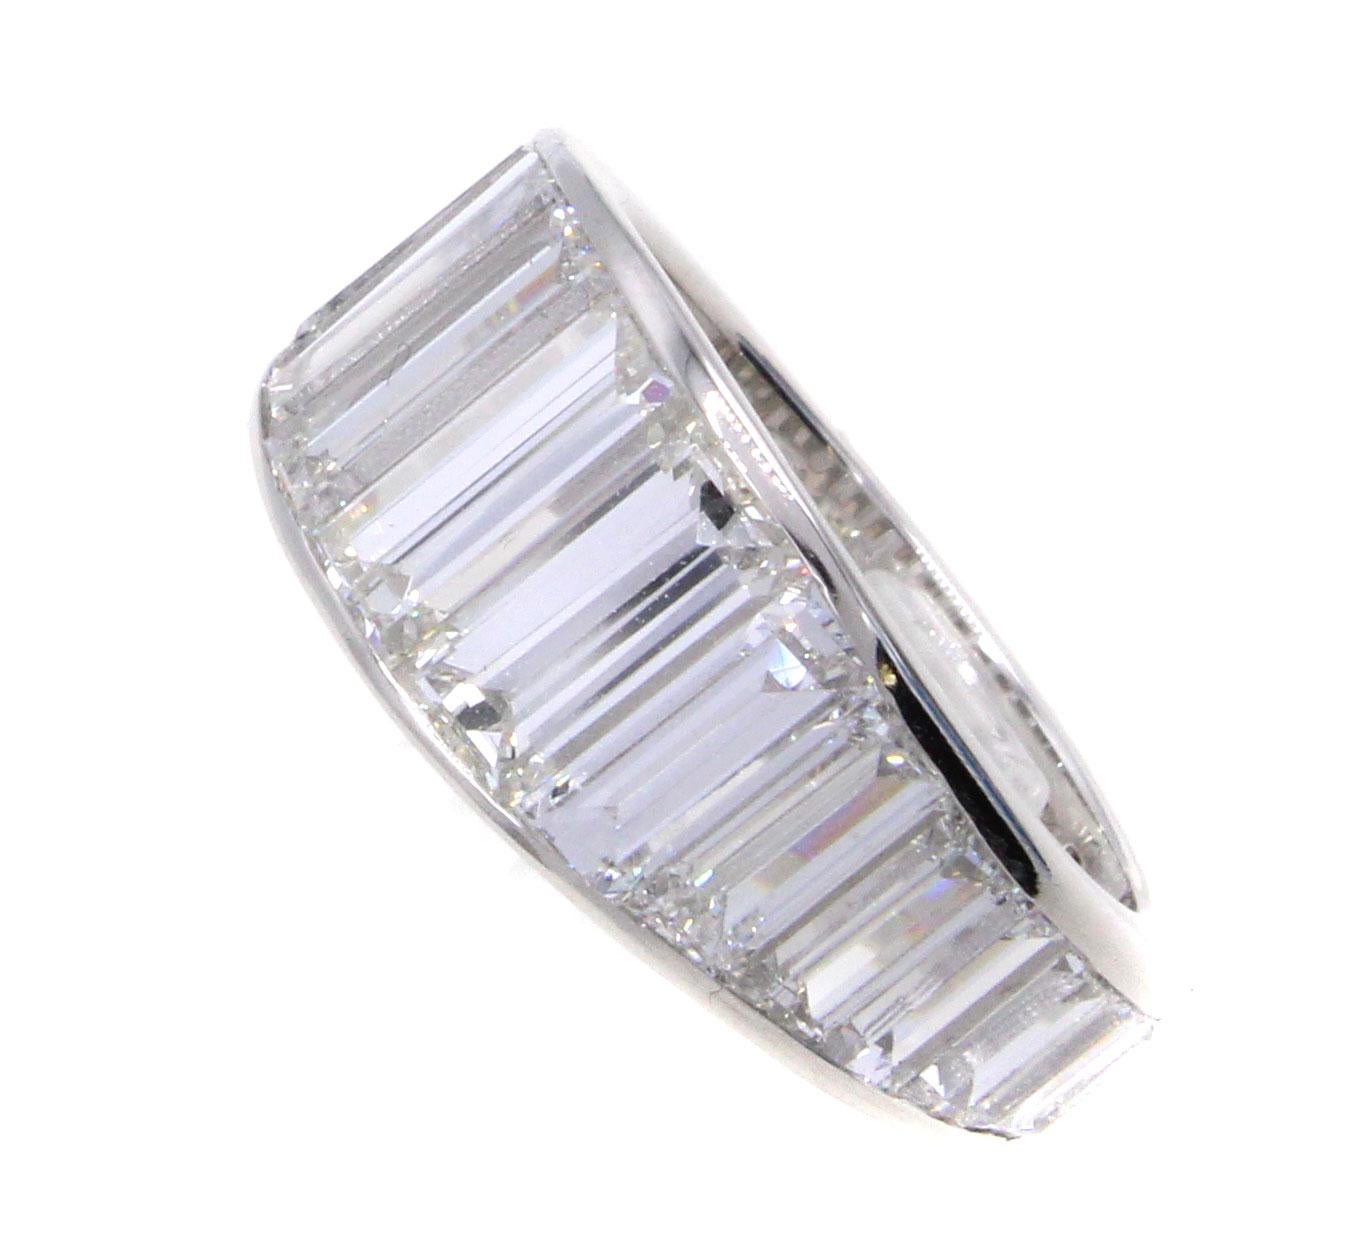 This unique and masterfully handcrafted platinum eternity band is set with 26 in size graduating white and bright baguette cut diamonds, with a total diamond weight of 8.10 carats. Each diamond in this band has been perfectly cut to fit next to the